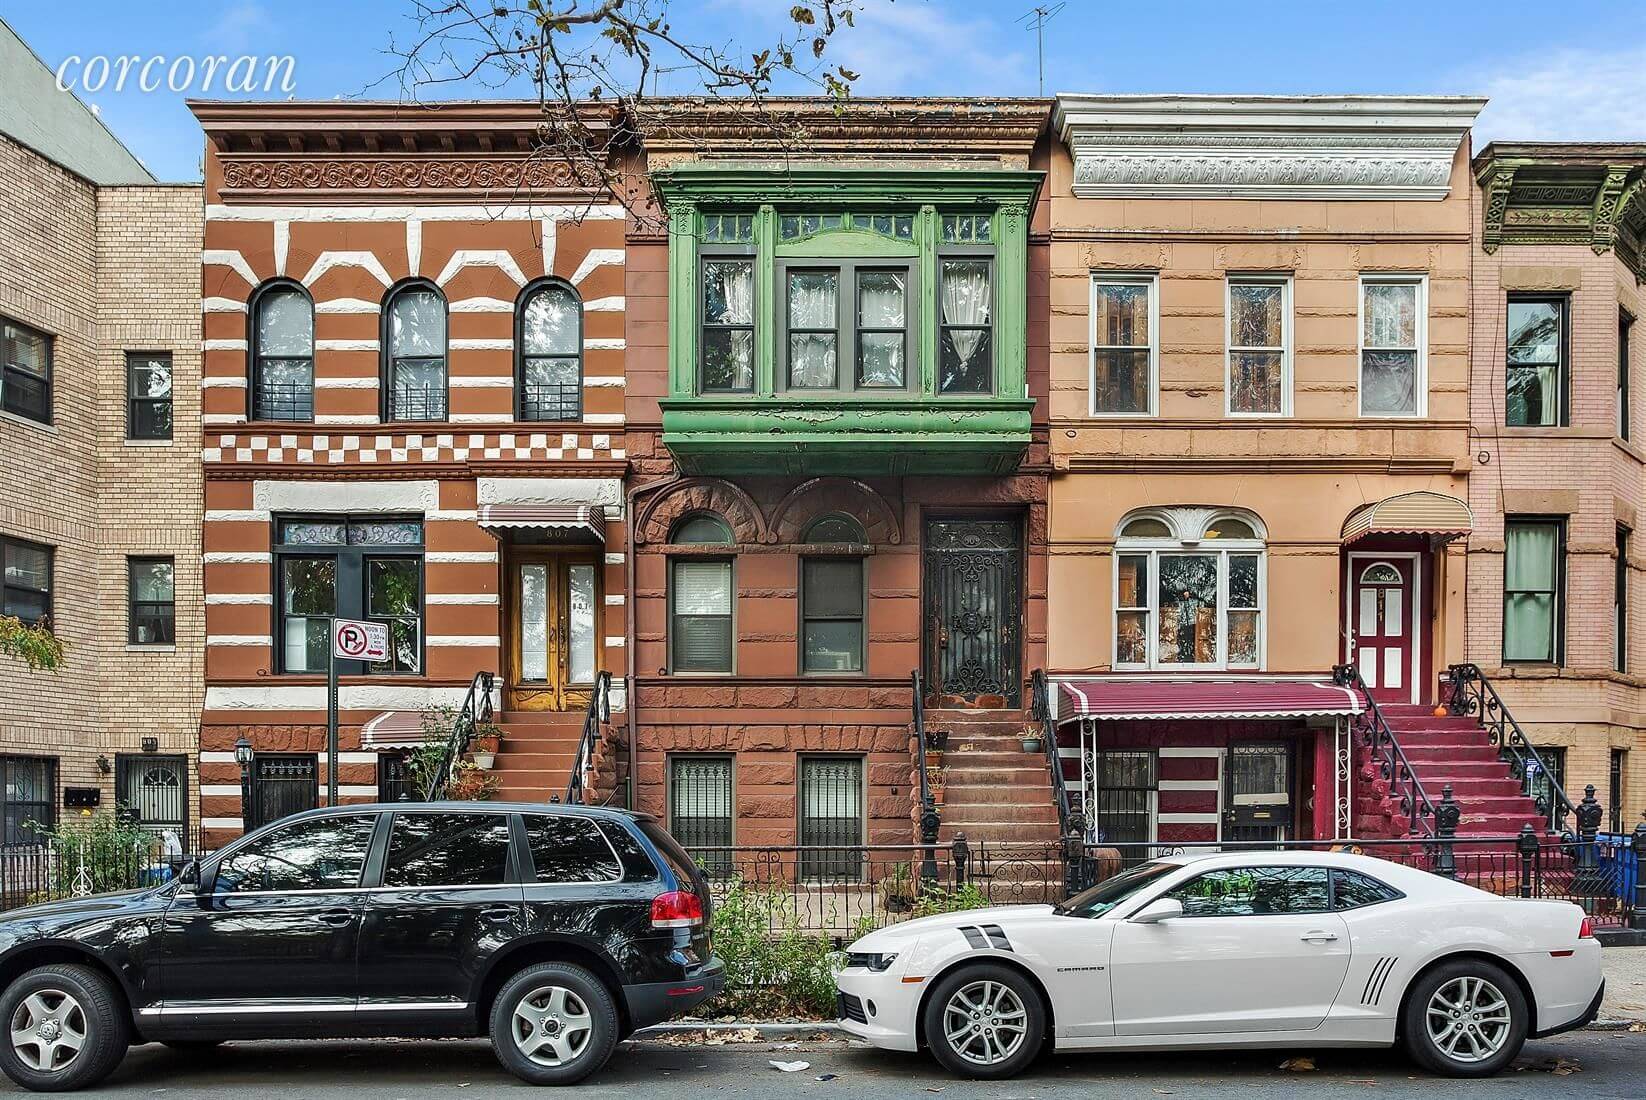 Brooklyn Homes for Sale in Bed Stuy at 809 Halsey Street